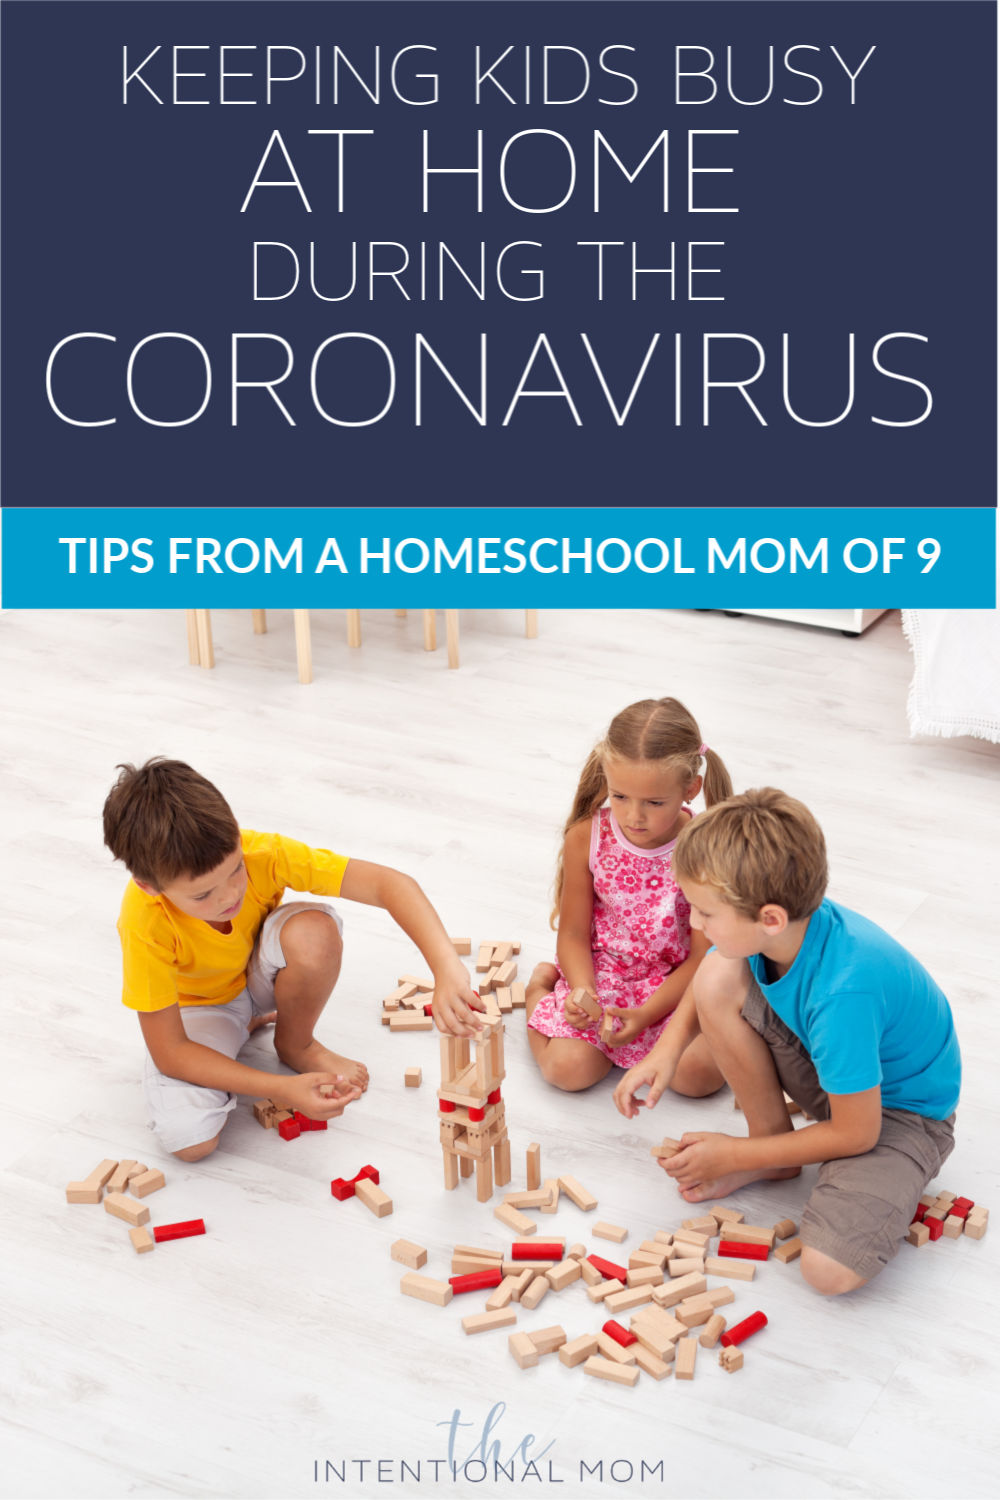 Keeping Kids Busy At Home During the Coronavirus [From a Homeschool Mom of 9]